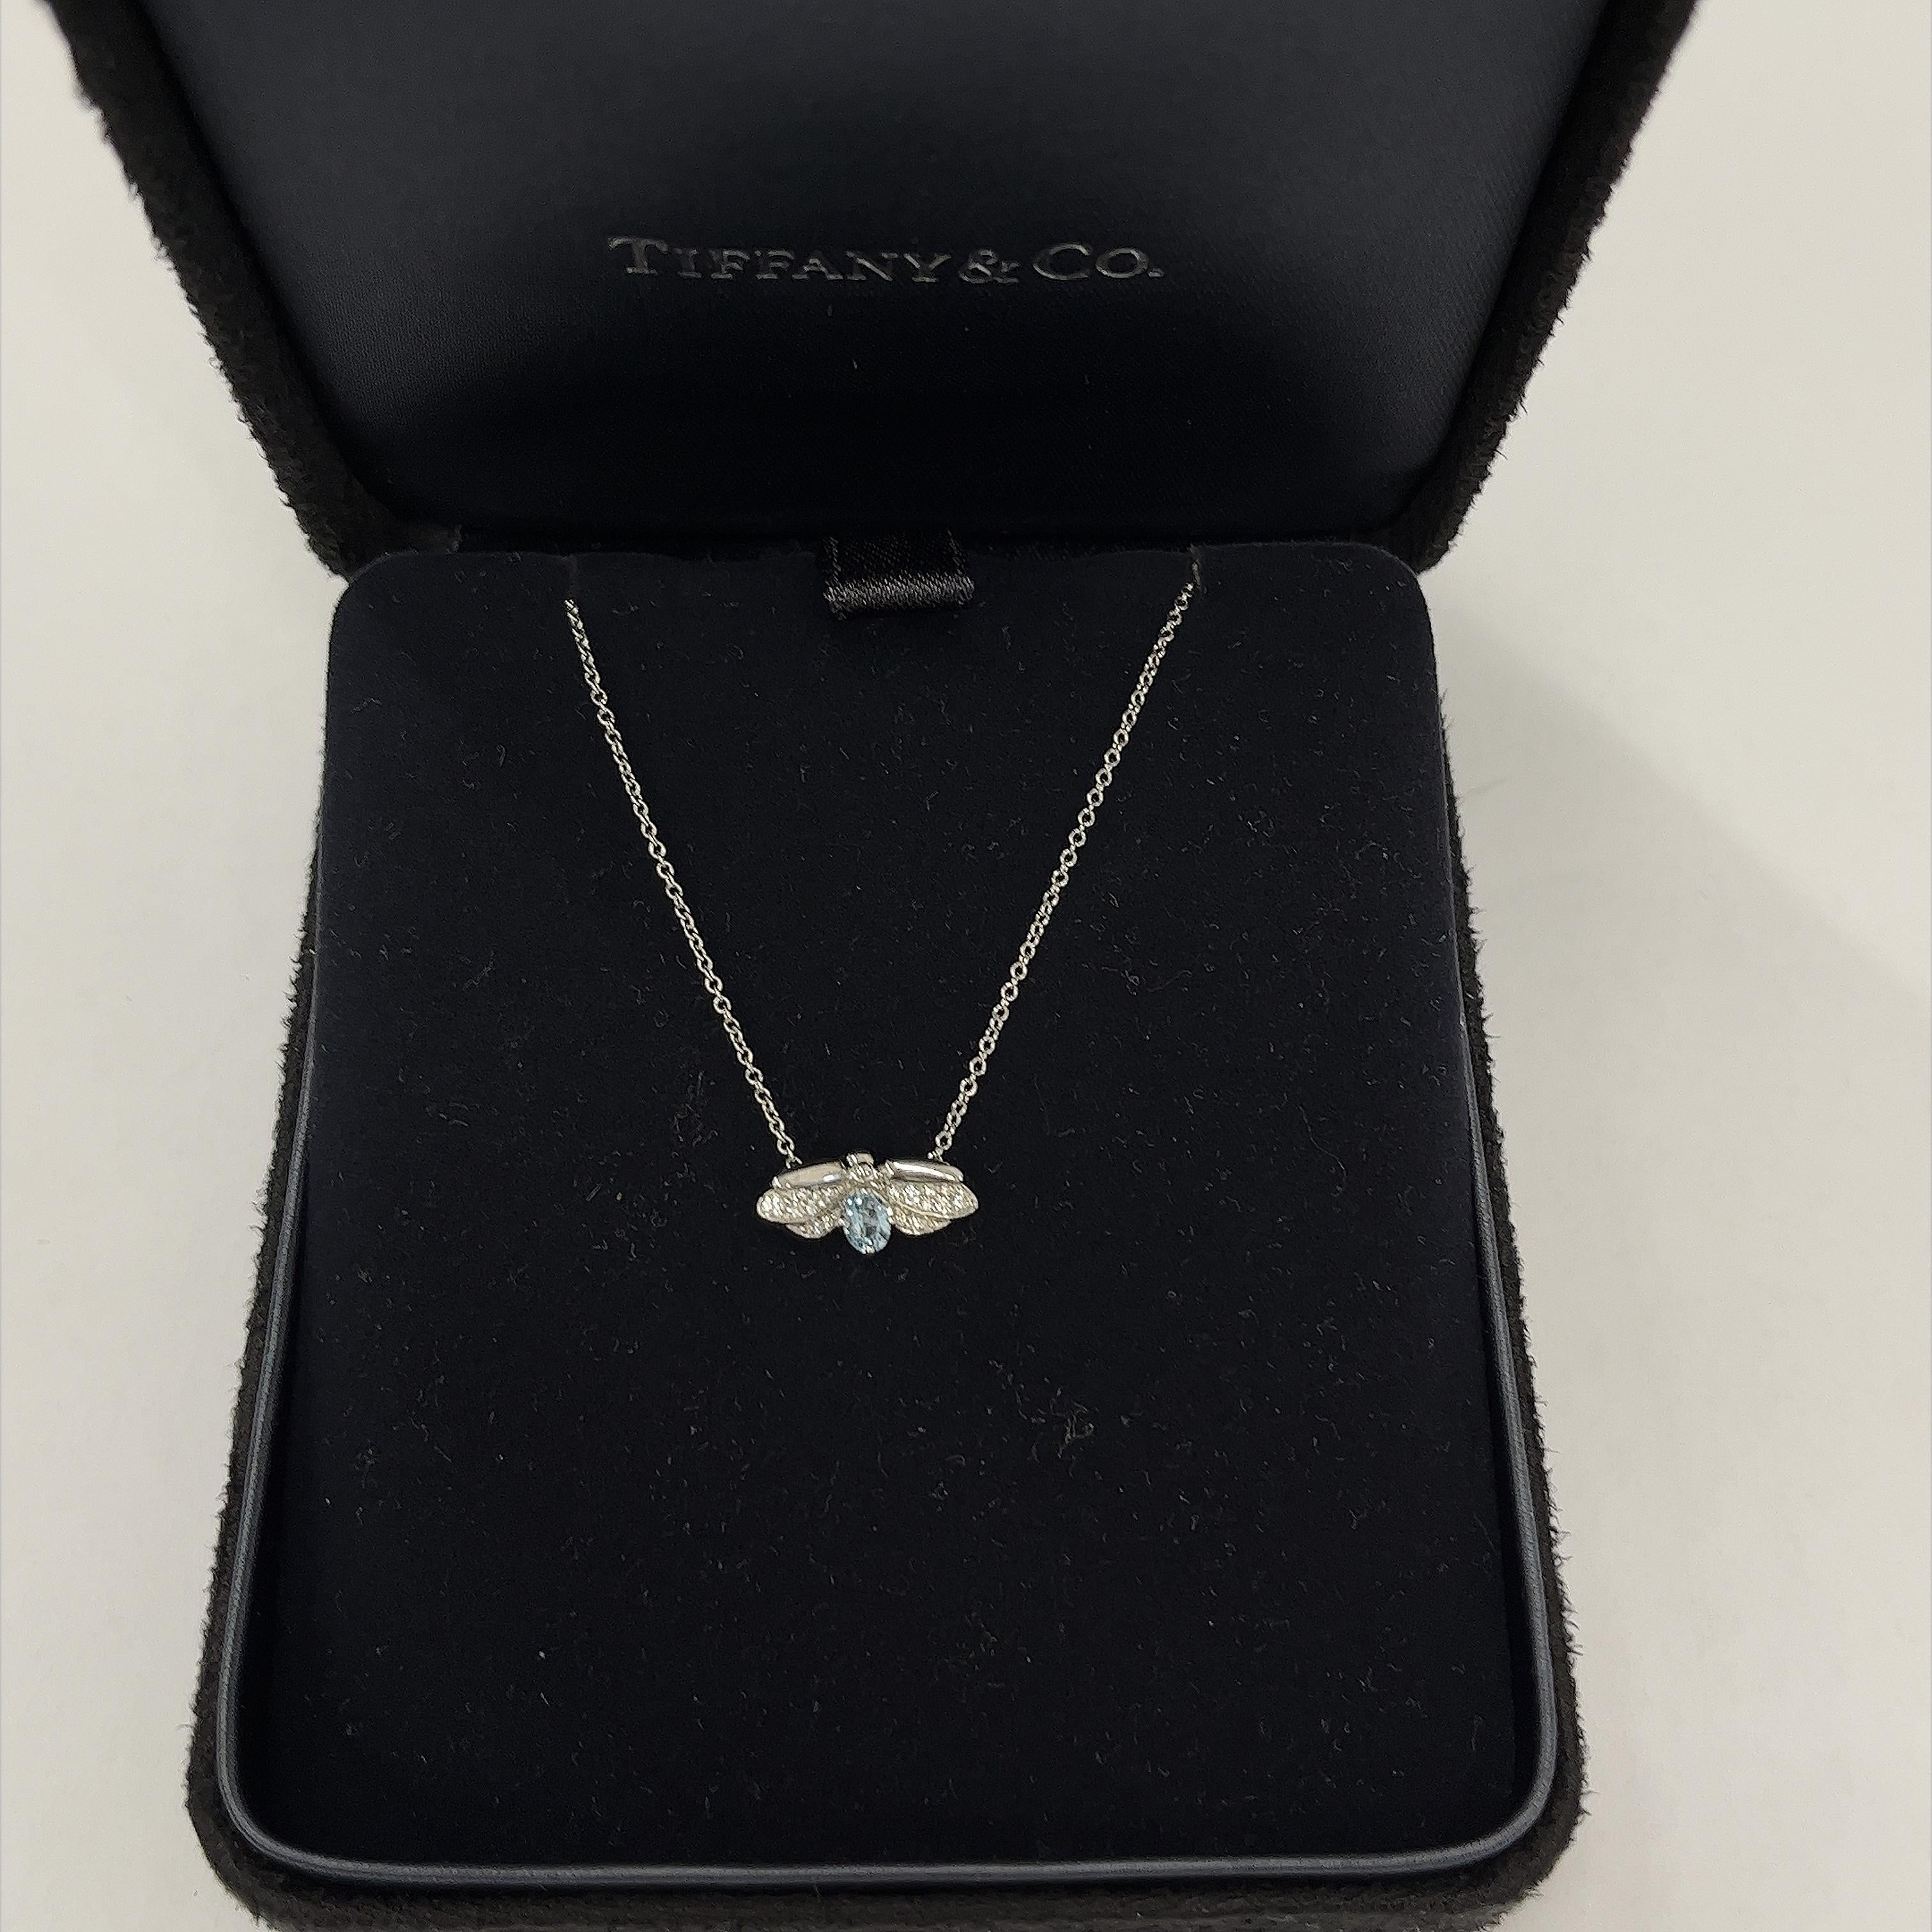 Tiffany & Co Aquamarine Firefly Pendant Necklace Set In Platinum With Brilliant Cut Natural Diamonds Decorated with One Oval Aquamarine.
With Original Box
Total Weight: 3.12g
Pendant Dimension: L 14.80mm X W 7.55mm
Necklace Length: 16